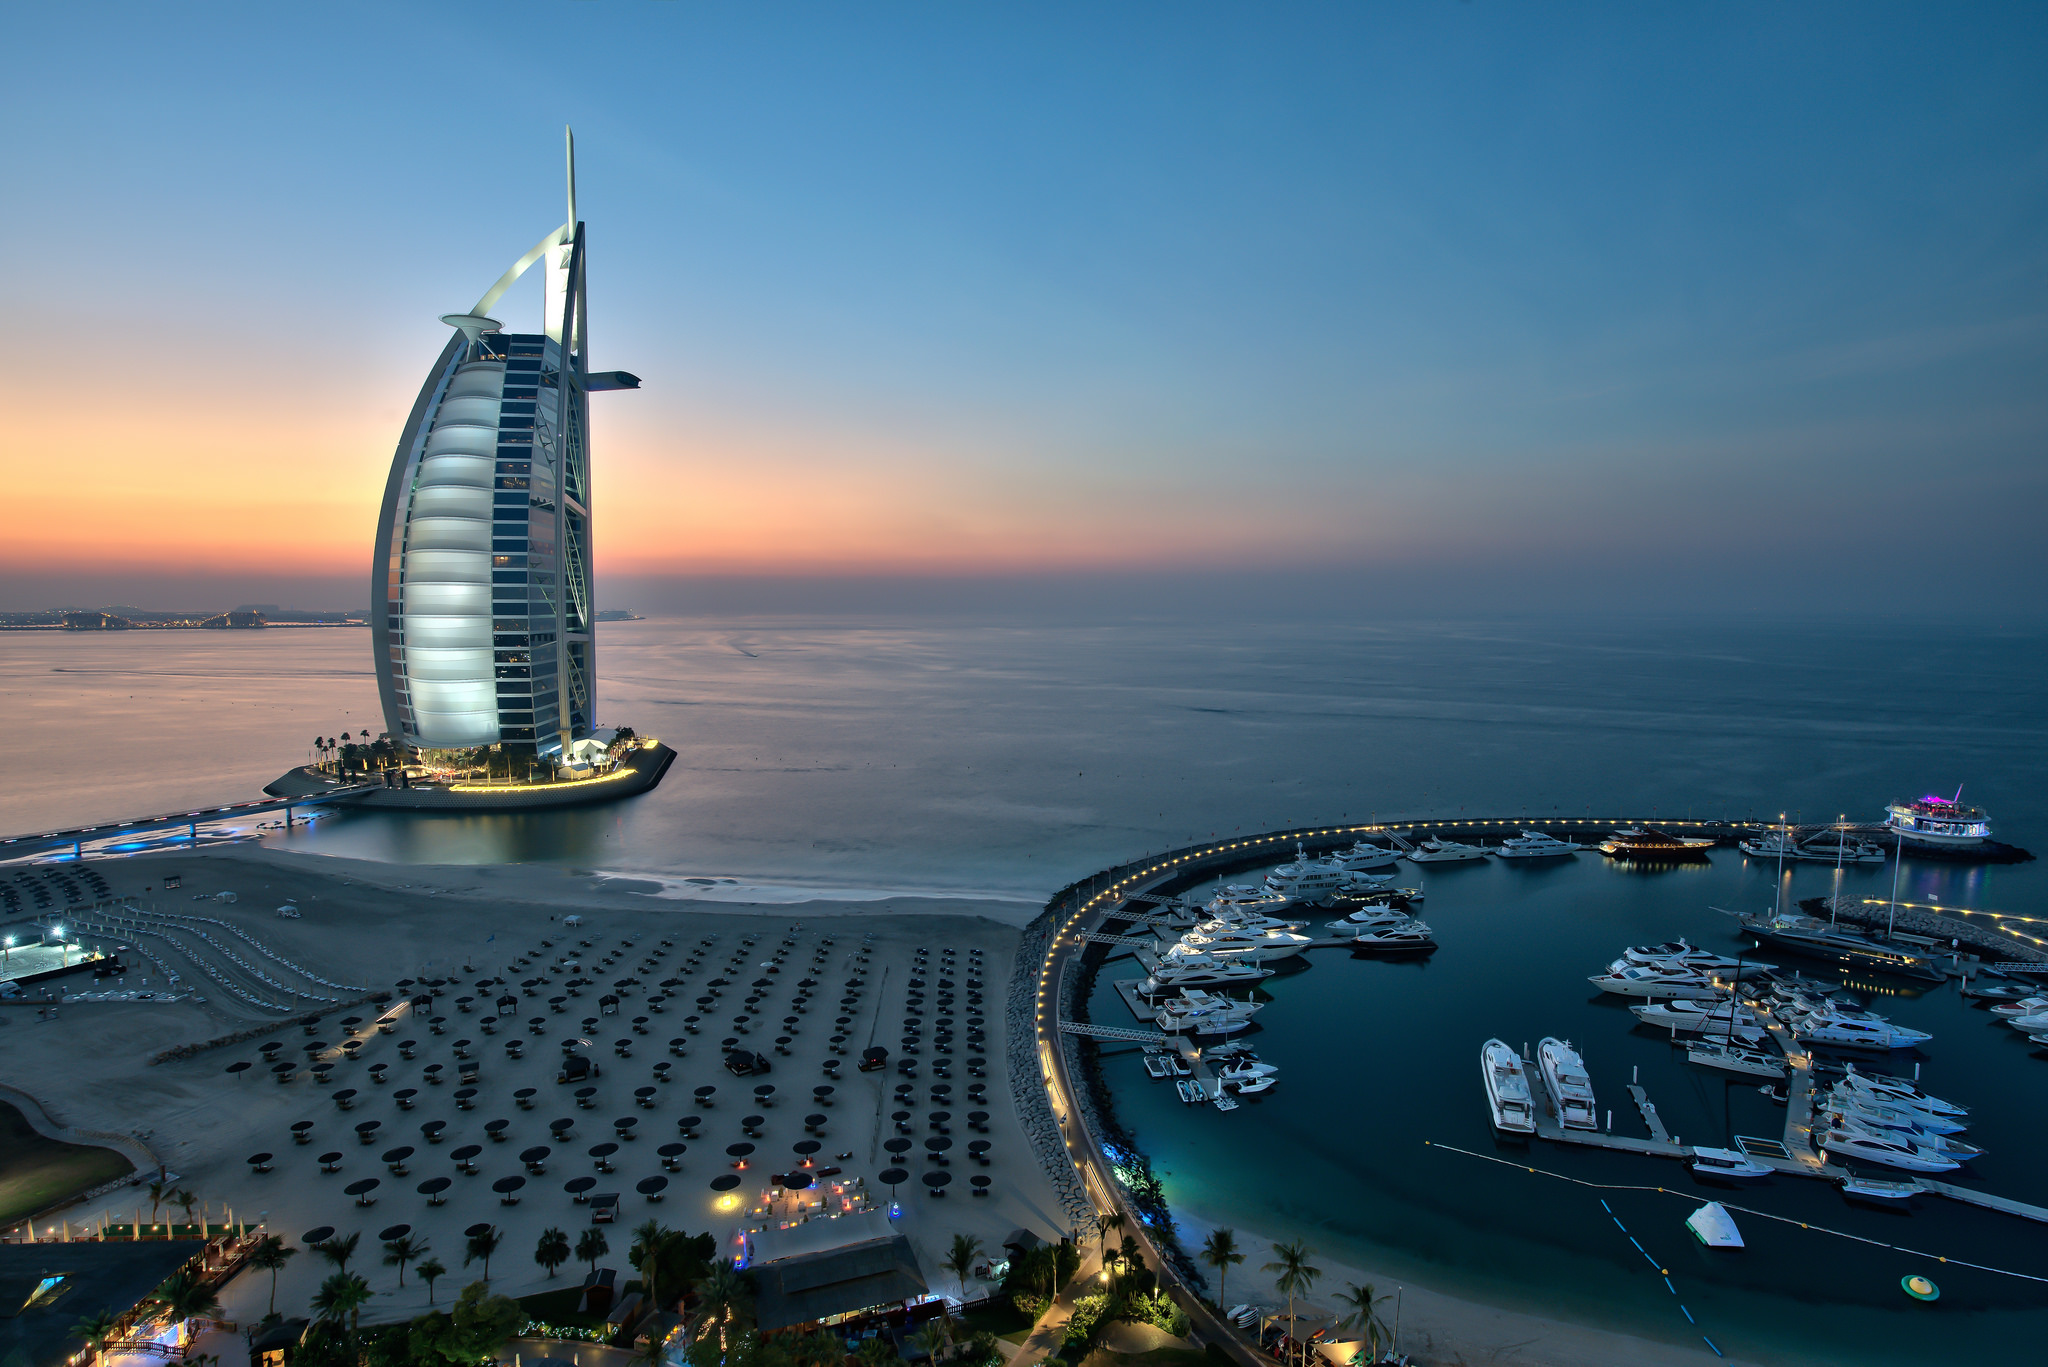 Burj Al Arab – The Only Hotel With “Seven Stars”